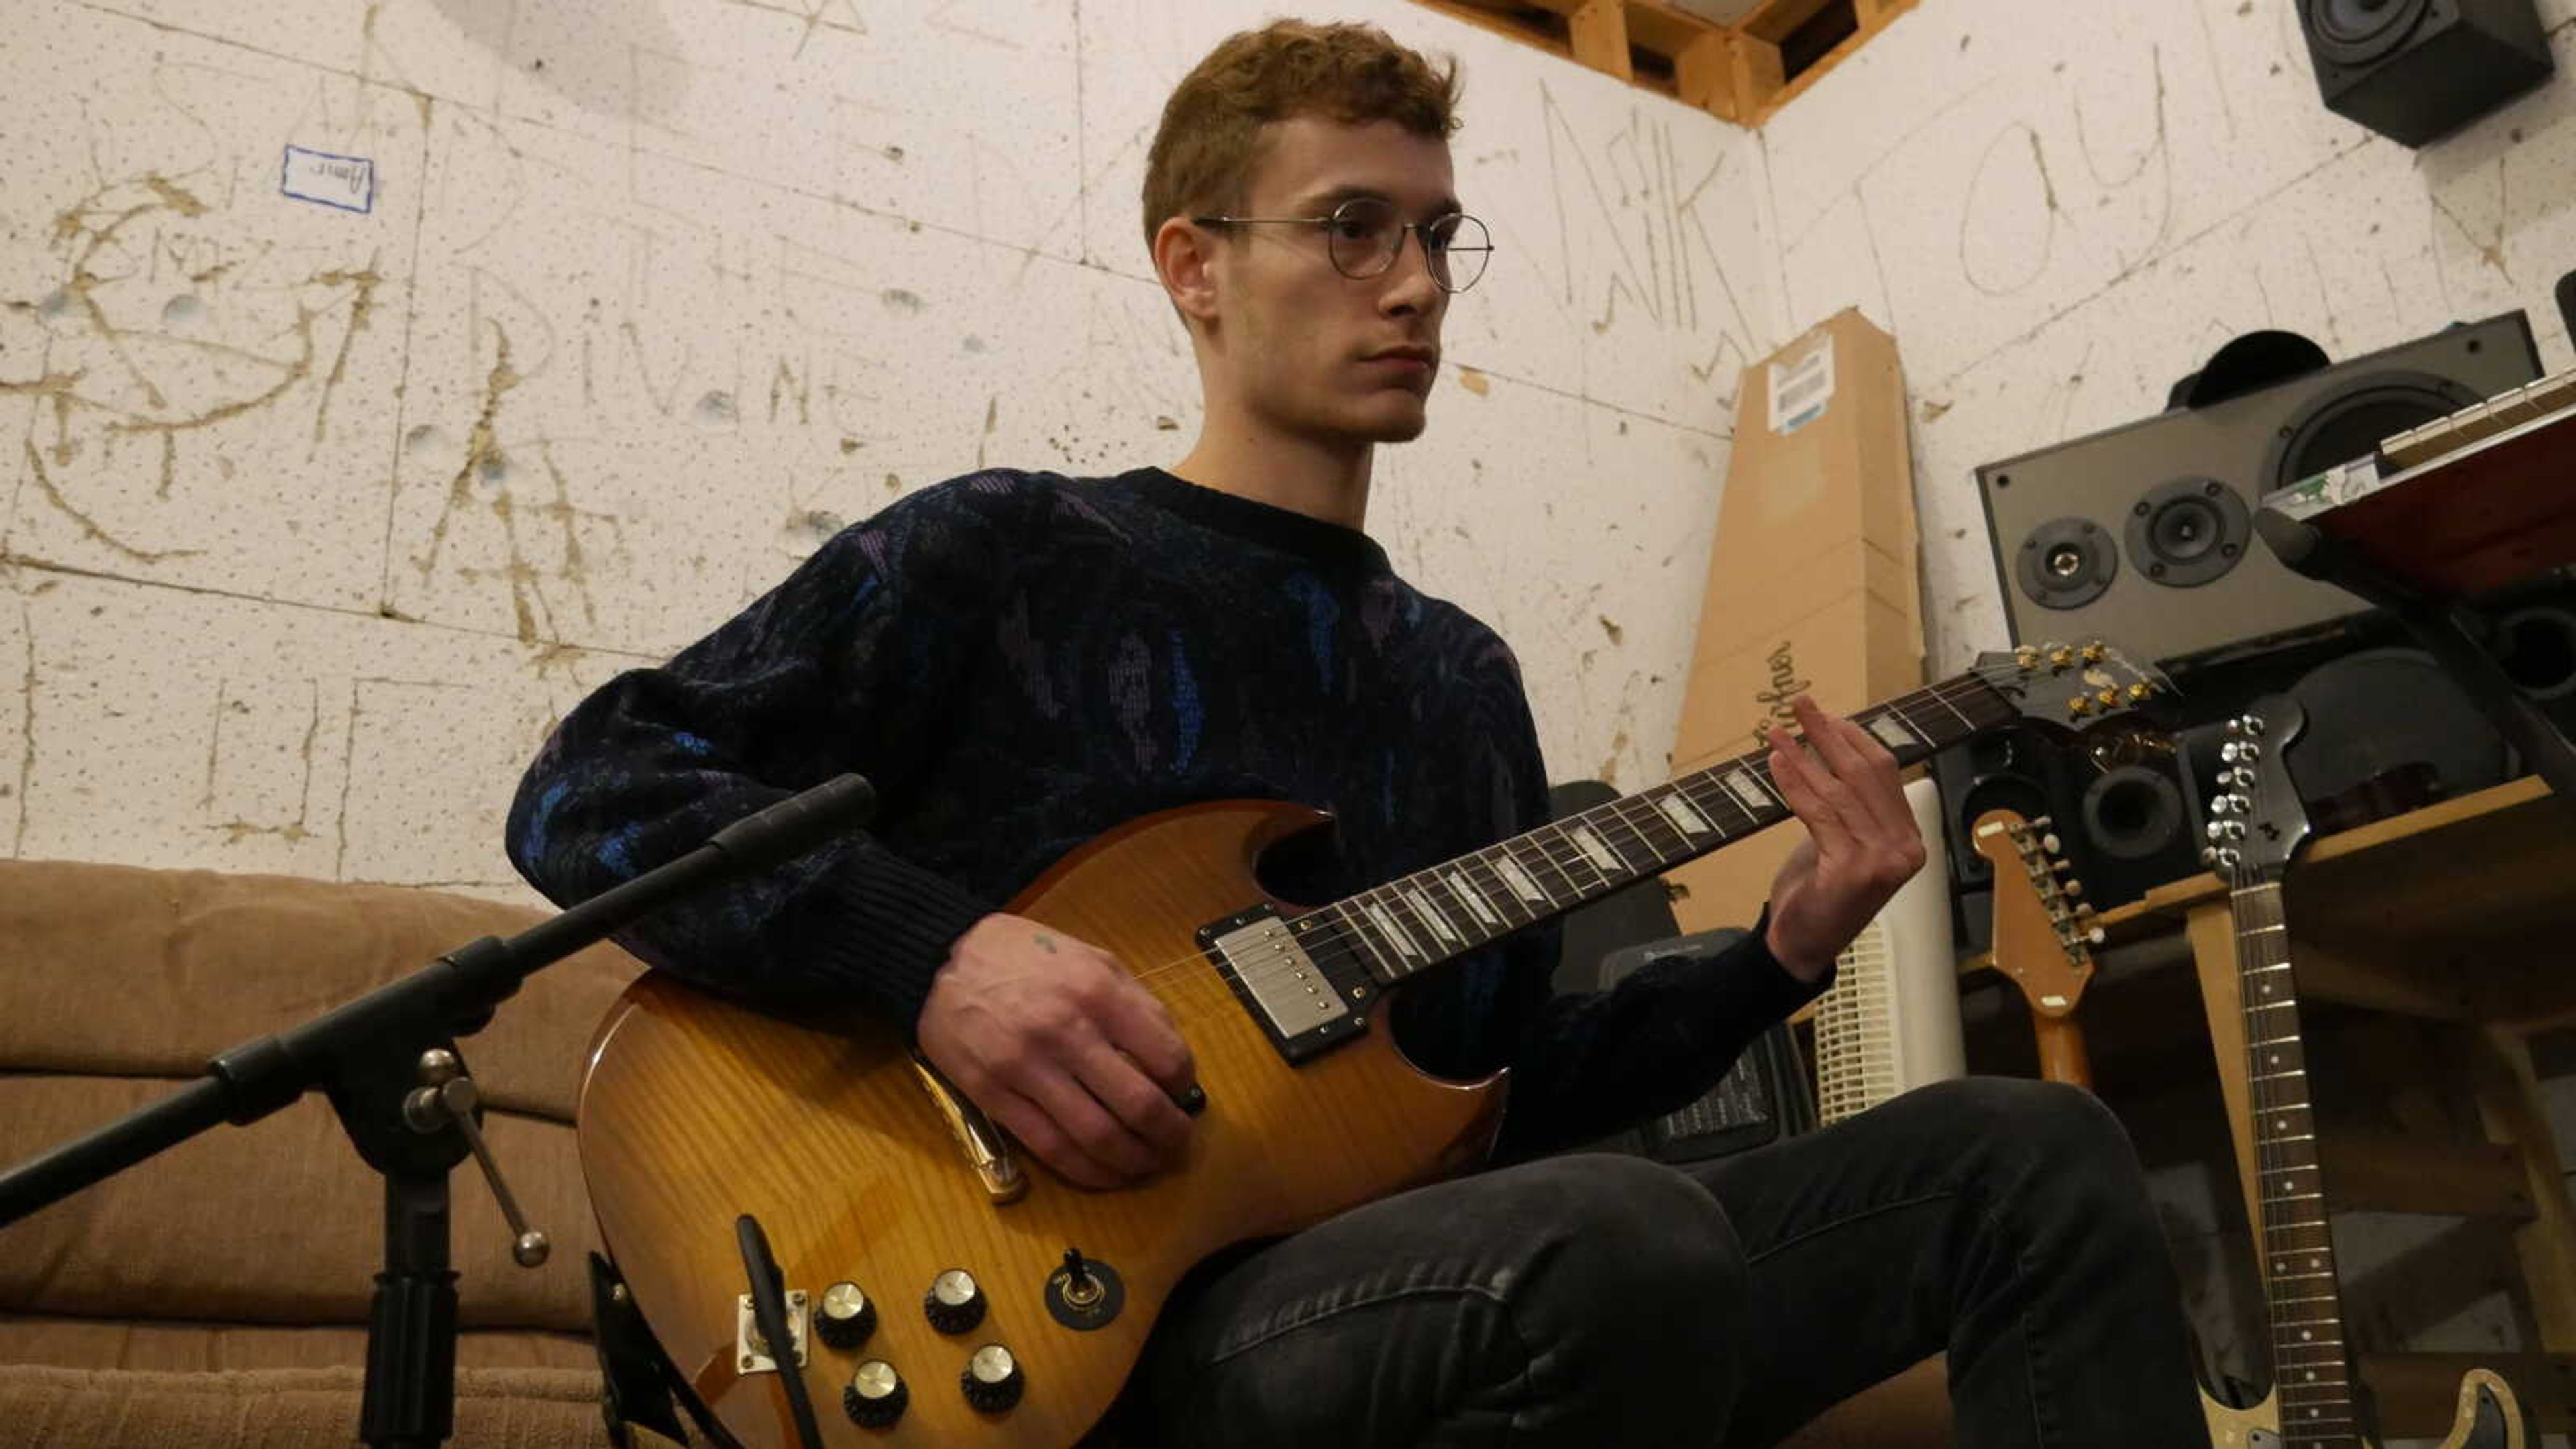 23-year-old Southeast freshman Nik Scarpaci, founder, vocalist, and composer for Noir Daze records a guitar part at his home studio in Jackson, Missouri.